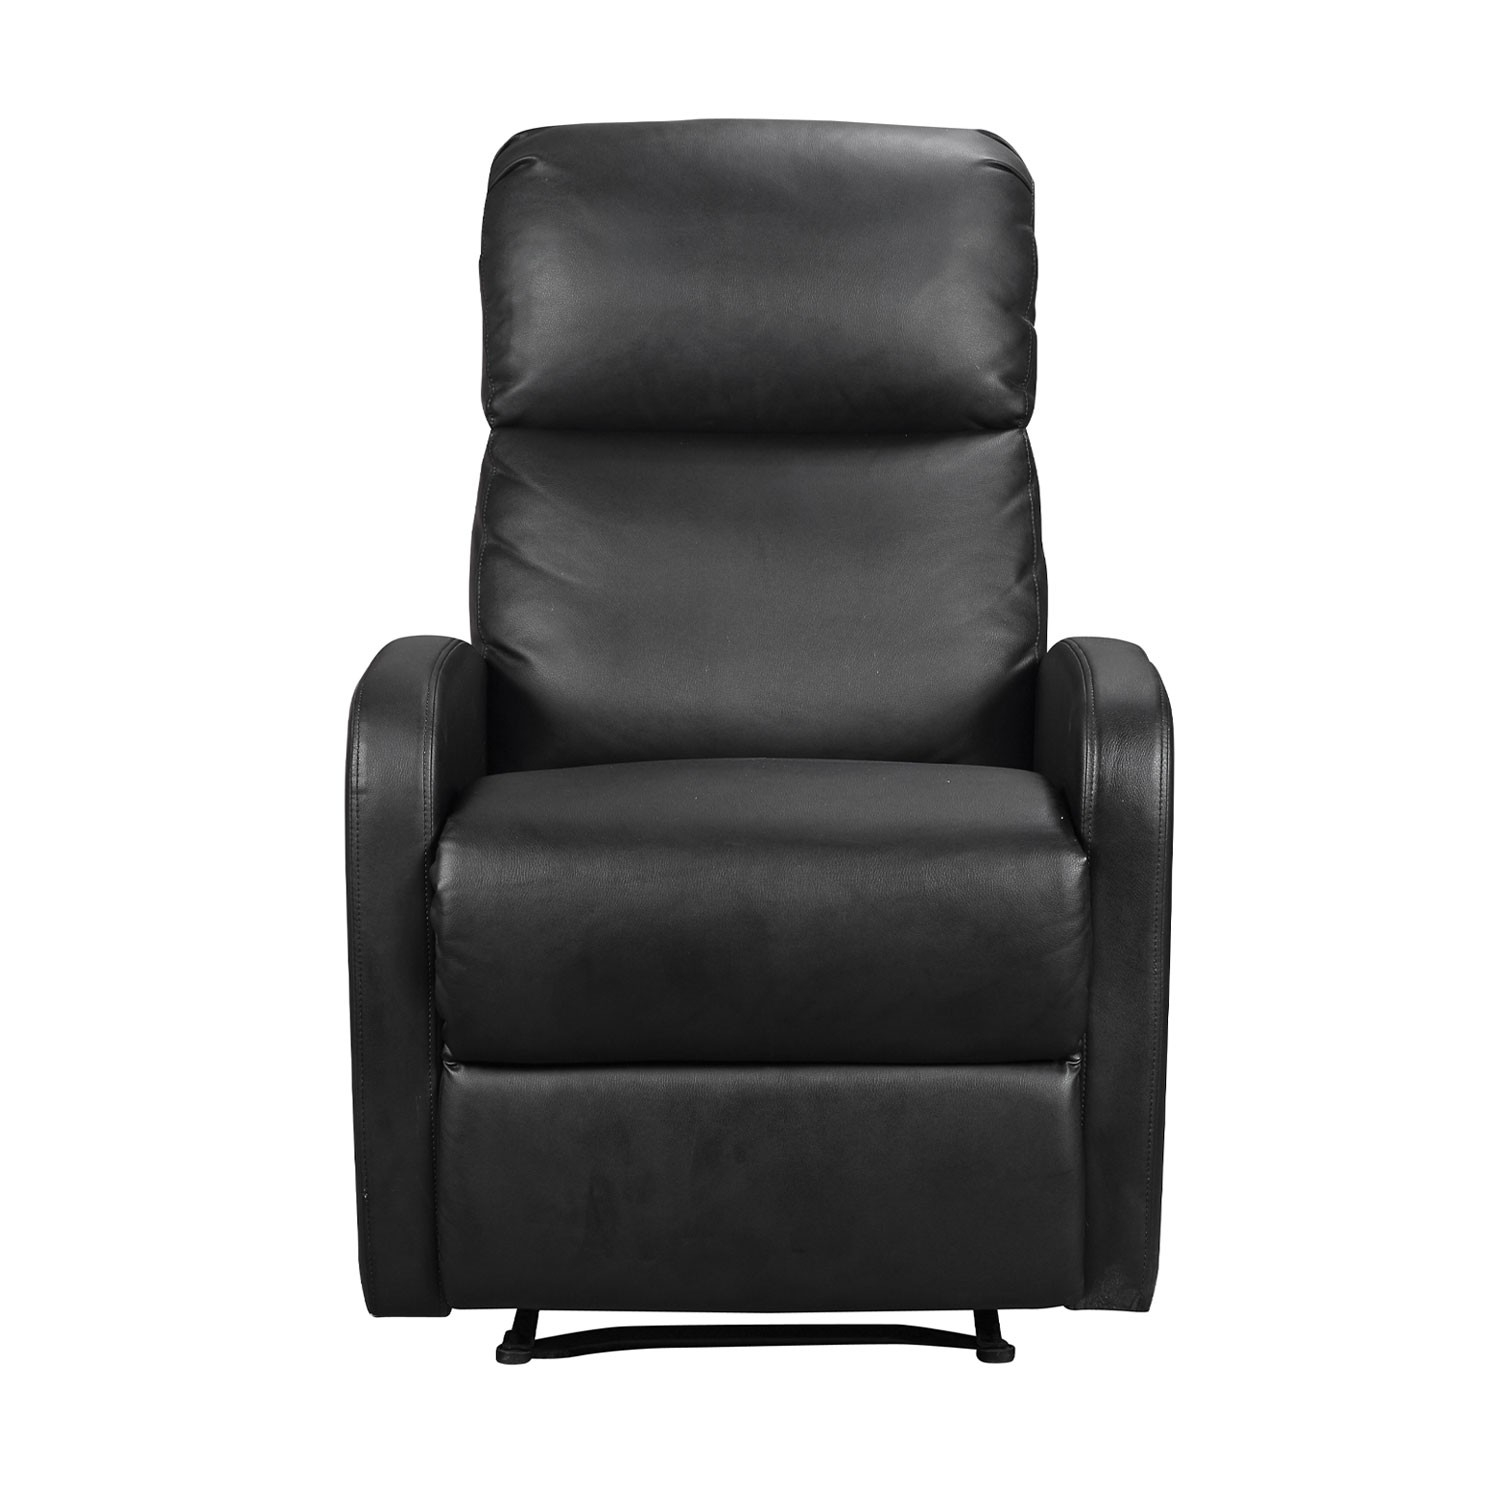 Fauteuil inclinable MAX noir